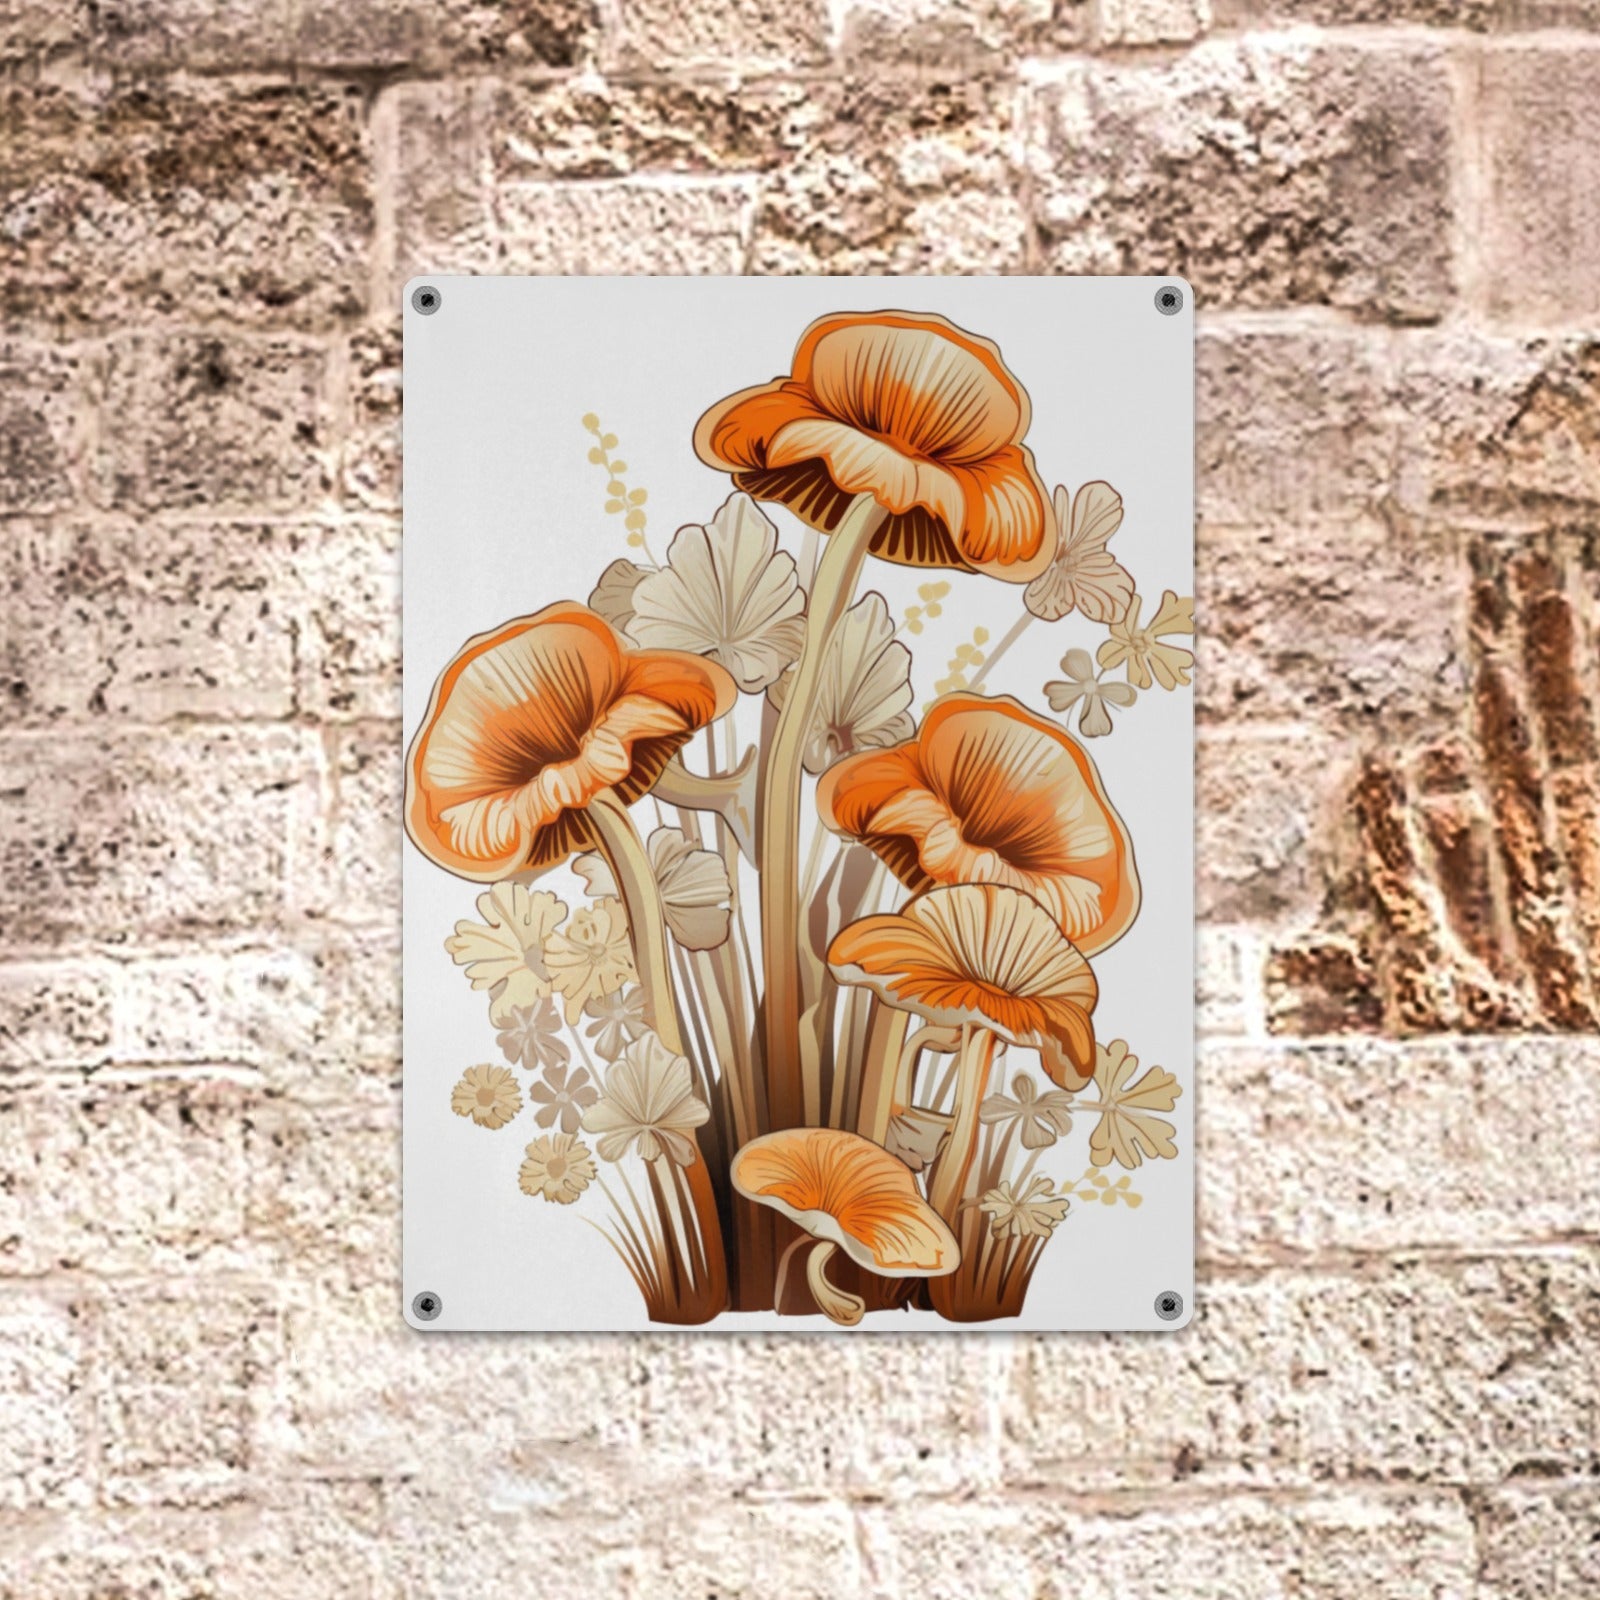 Whimsical Fantasy Fairycore Home Decor Wall Art Poster Mushrooms Sign Indoor / Outdoor Metal Tin Sign 12"x16"